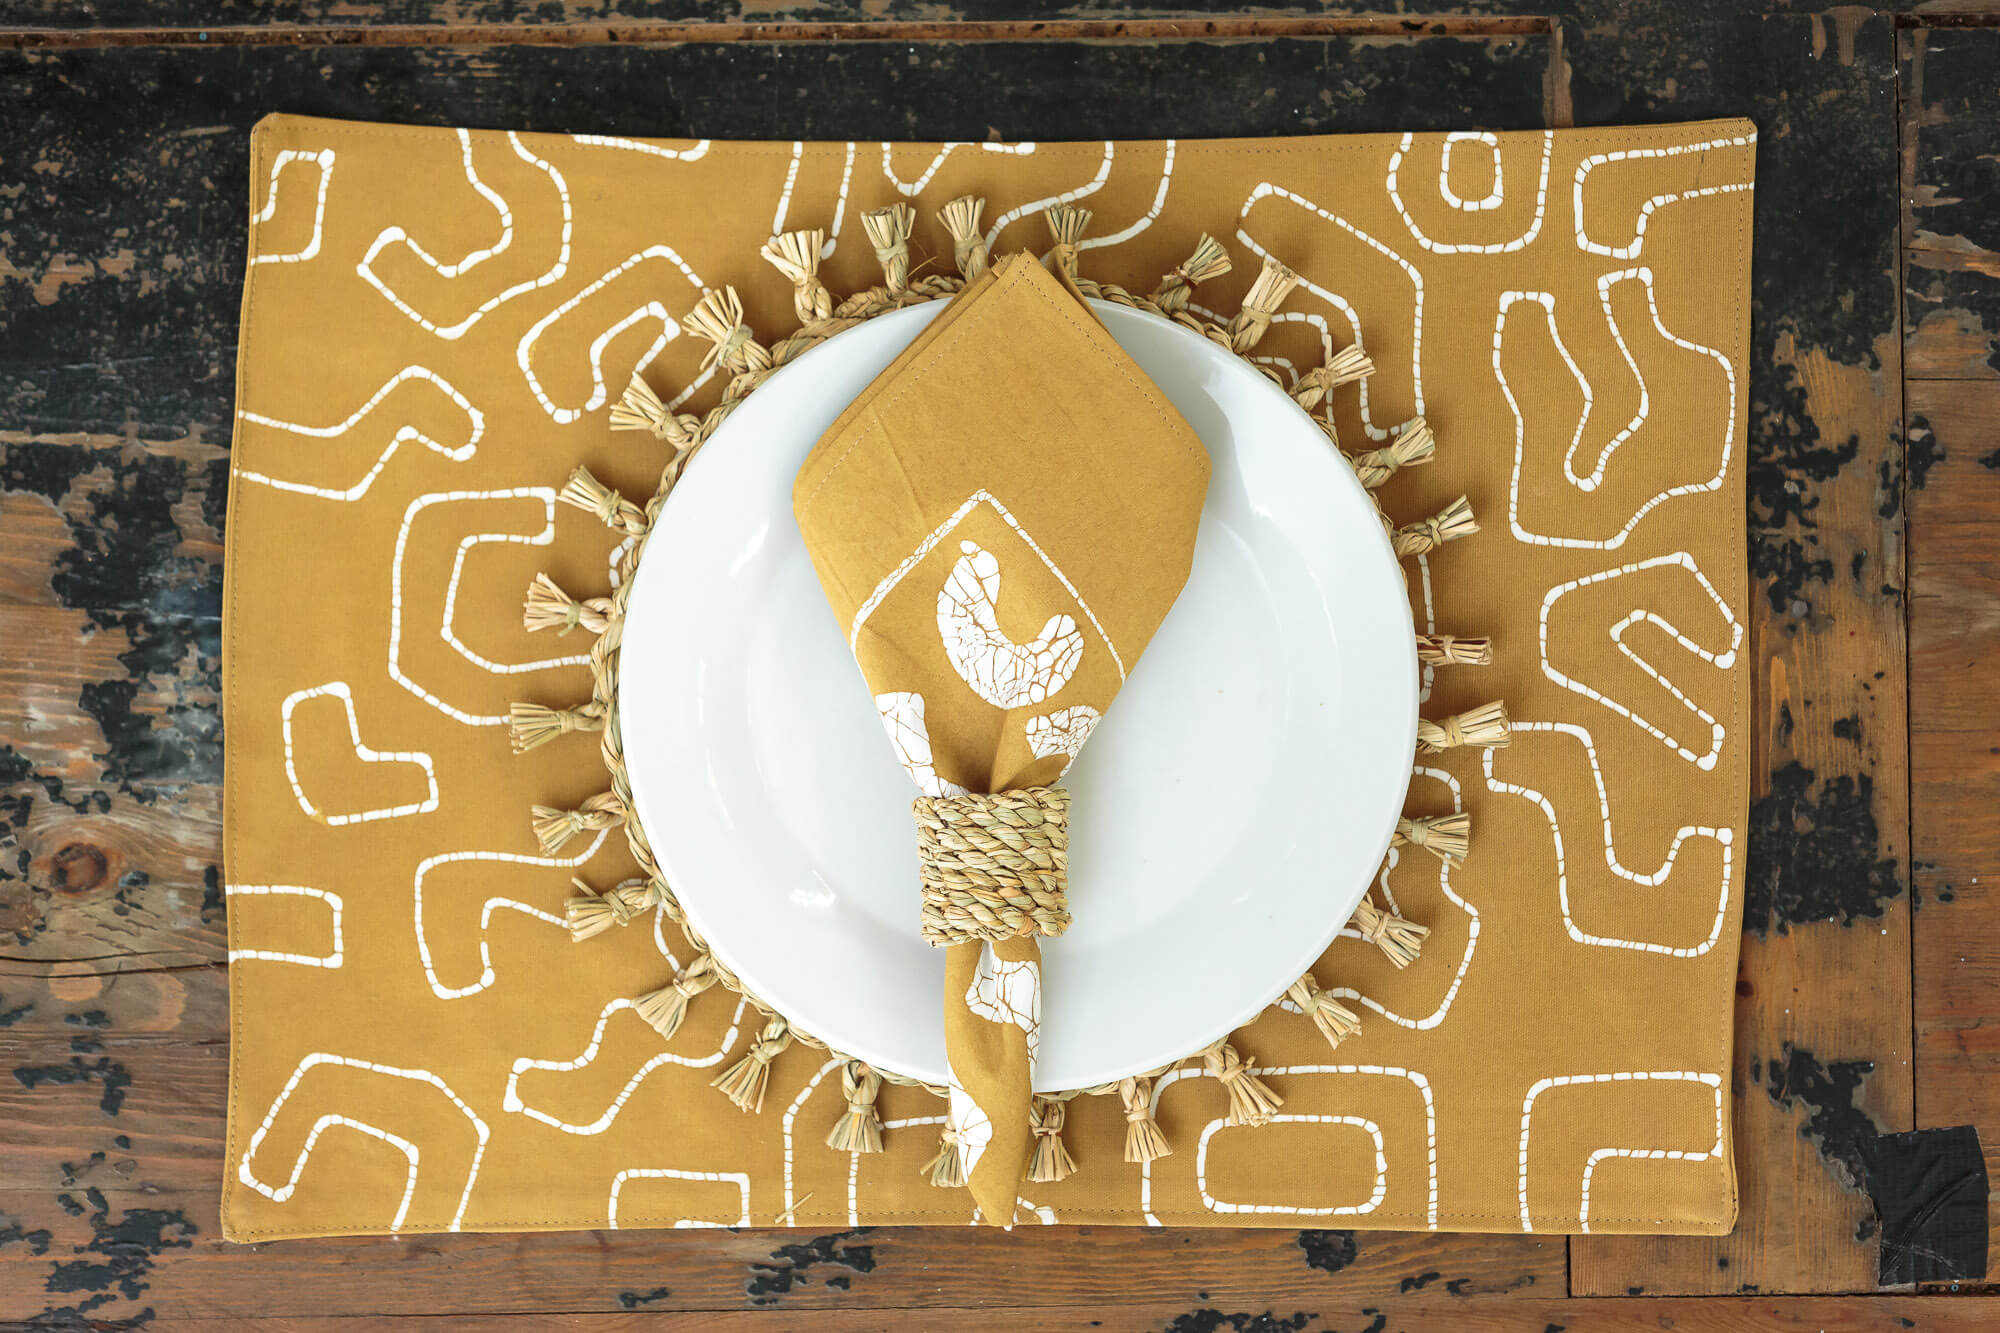 African made mustard yellow napkins, made on 100% cotton to bring sustainable style to your kitchen table.